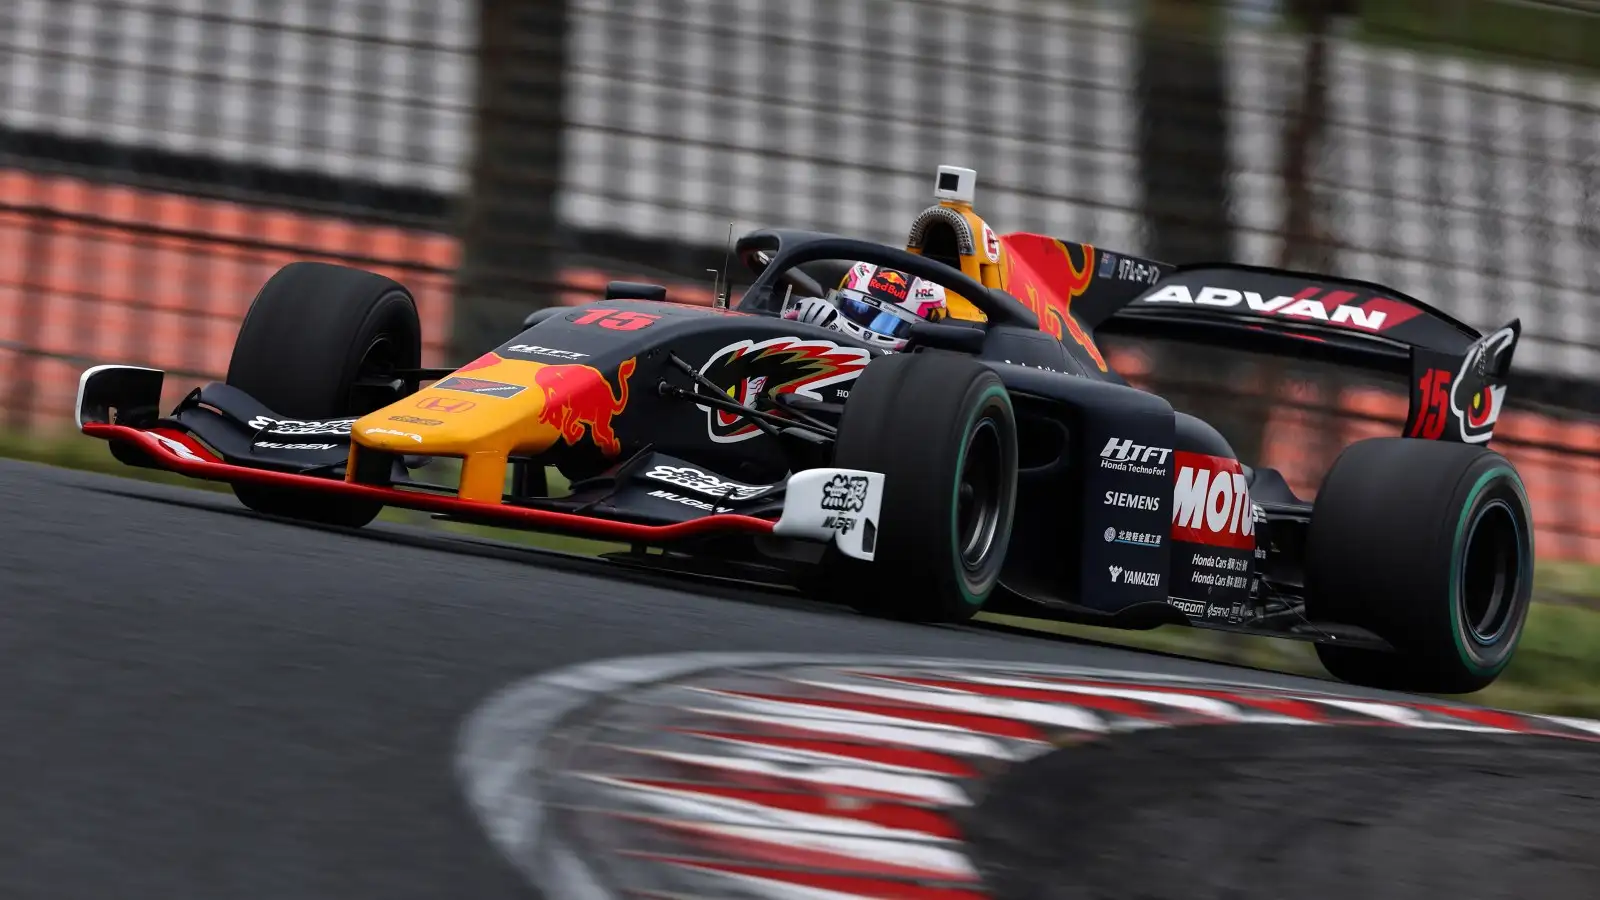 Liam Lawson Team Mugen, during round four of the Japanese Super Formula Championship at Autopolis, on May 19-21, 2023.